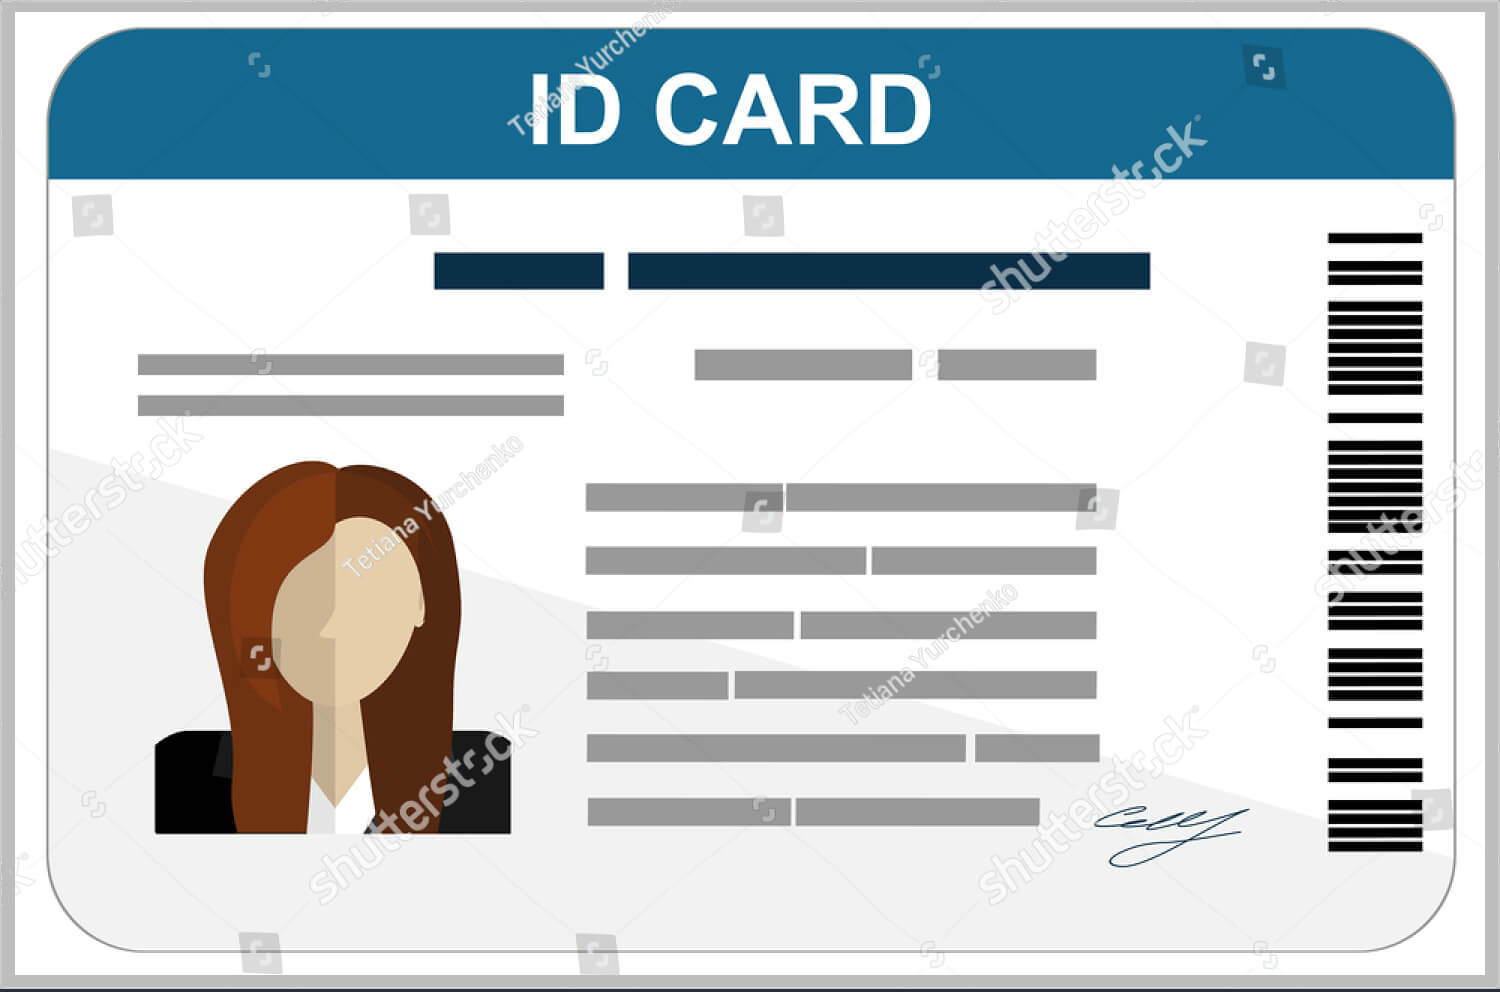 009 Id Card Format Photoshop Flat Design Template Awful Inside Pvc Id Card Template